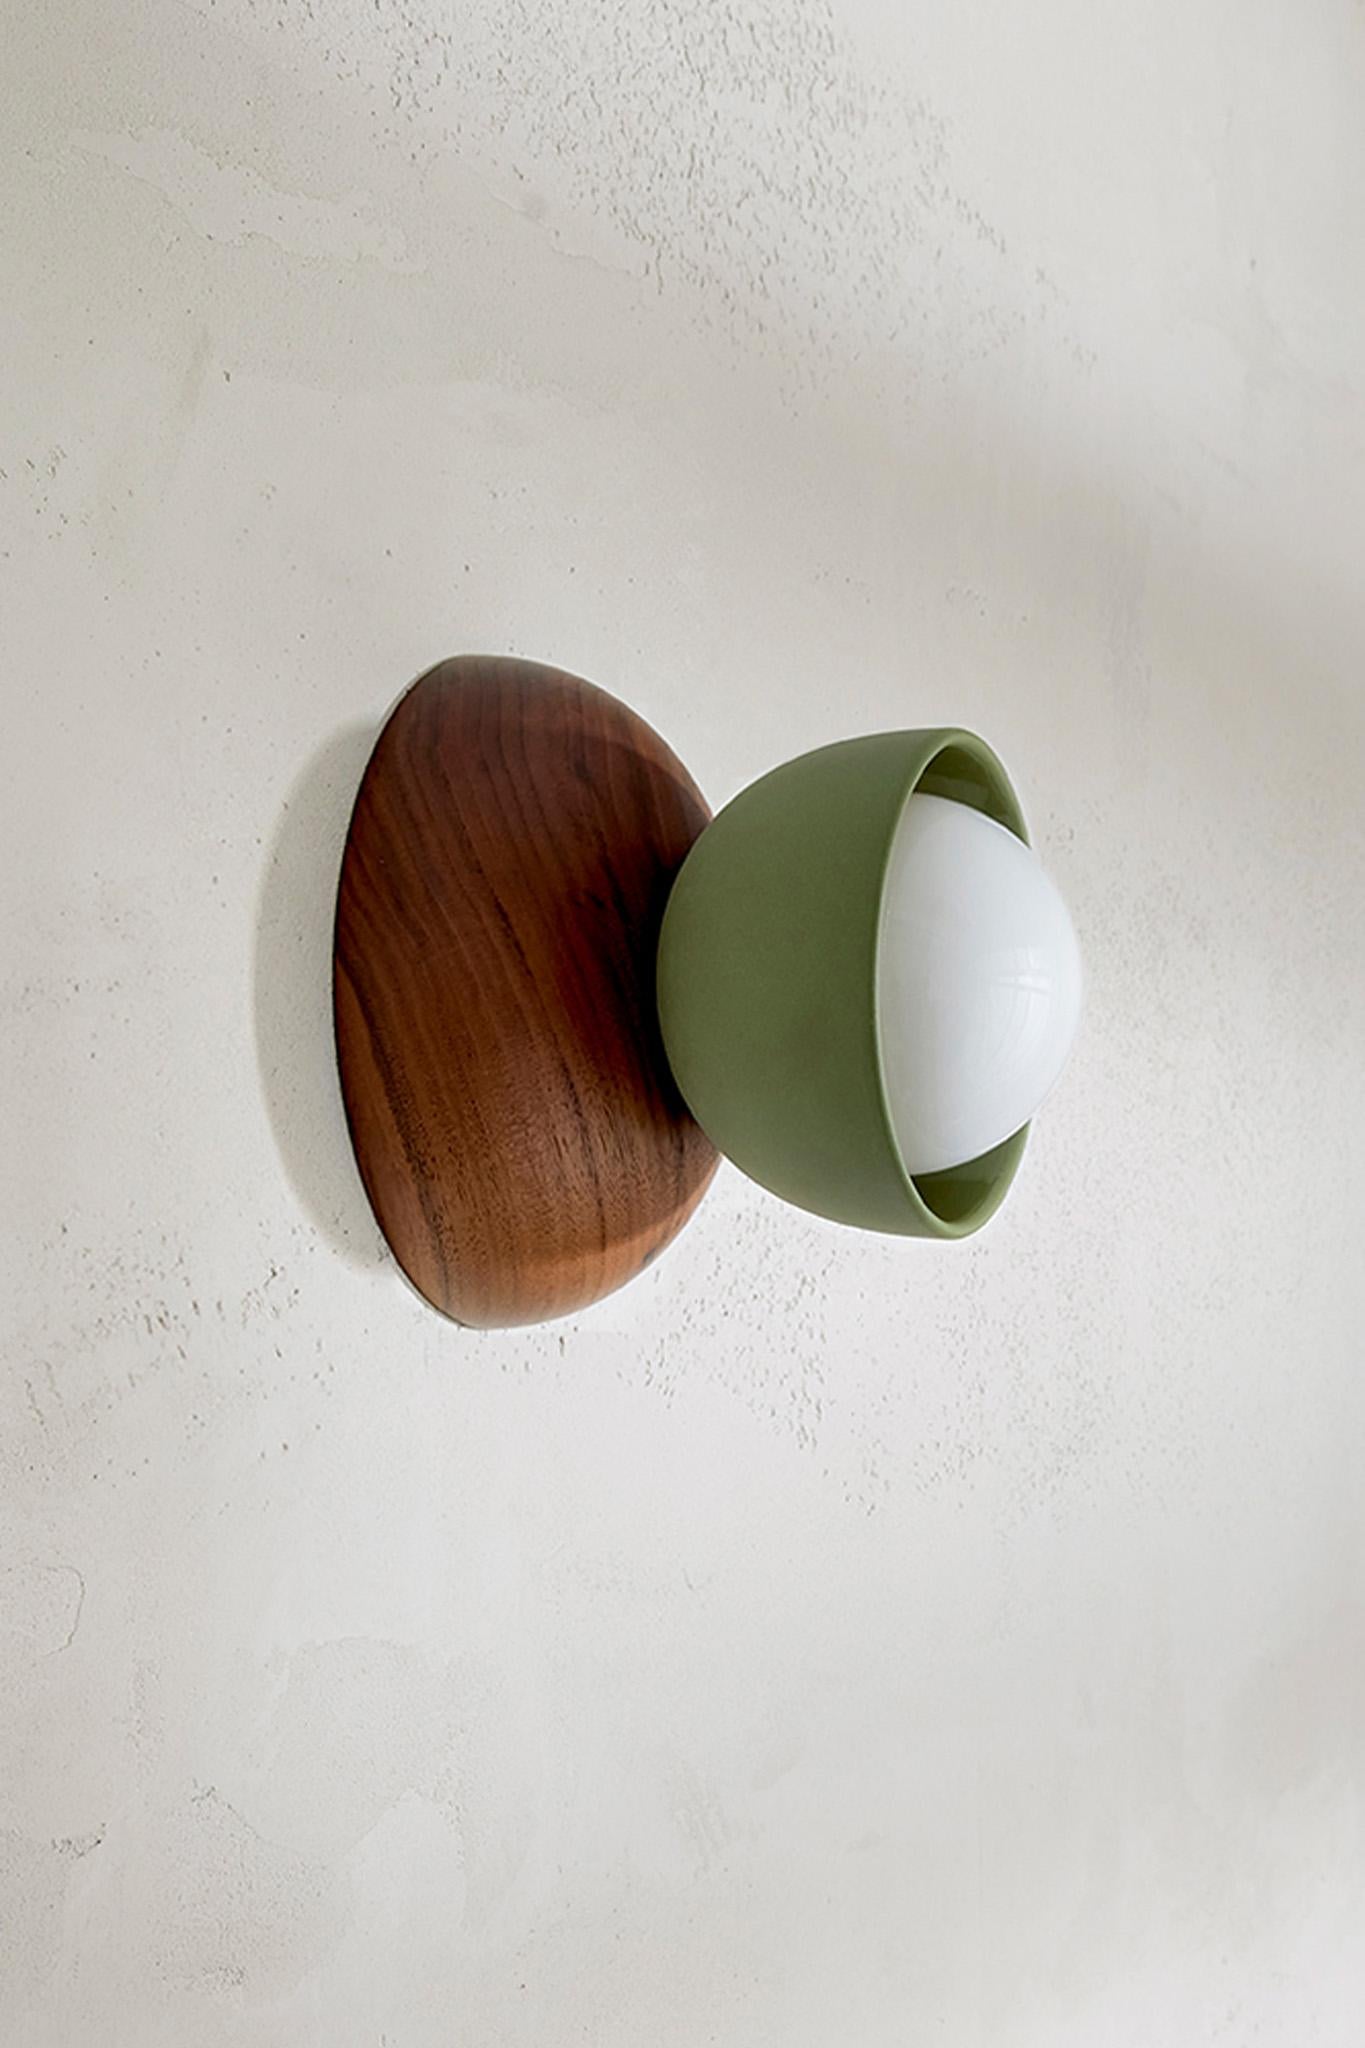 Woodwork Marz Designs, “Terra 00 Surface Sconce”, Ceramic and Timber Surface Sconce For Sale